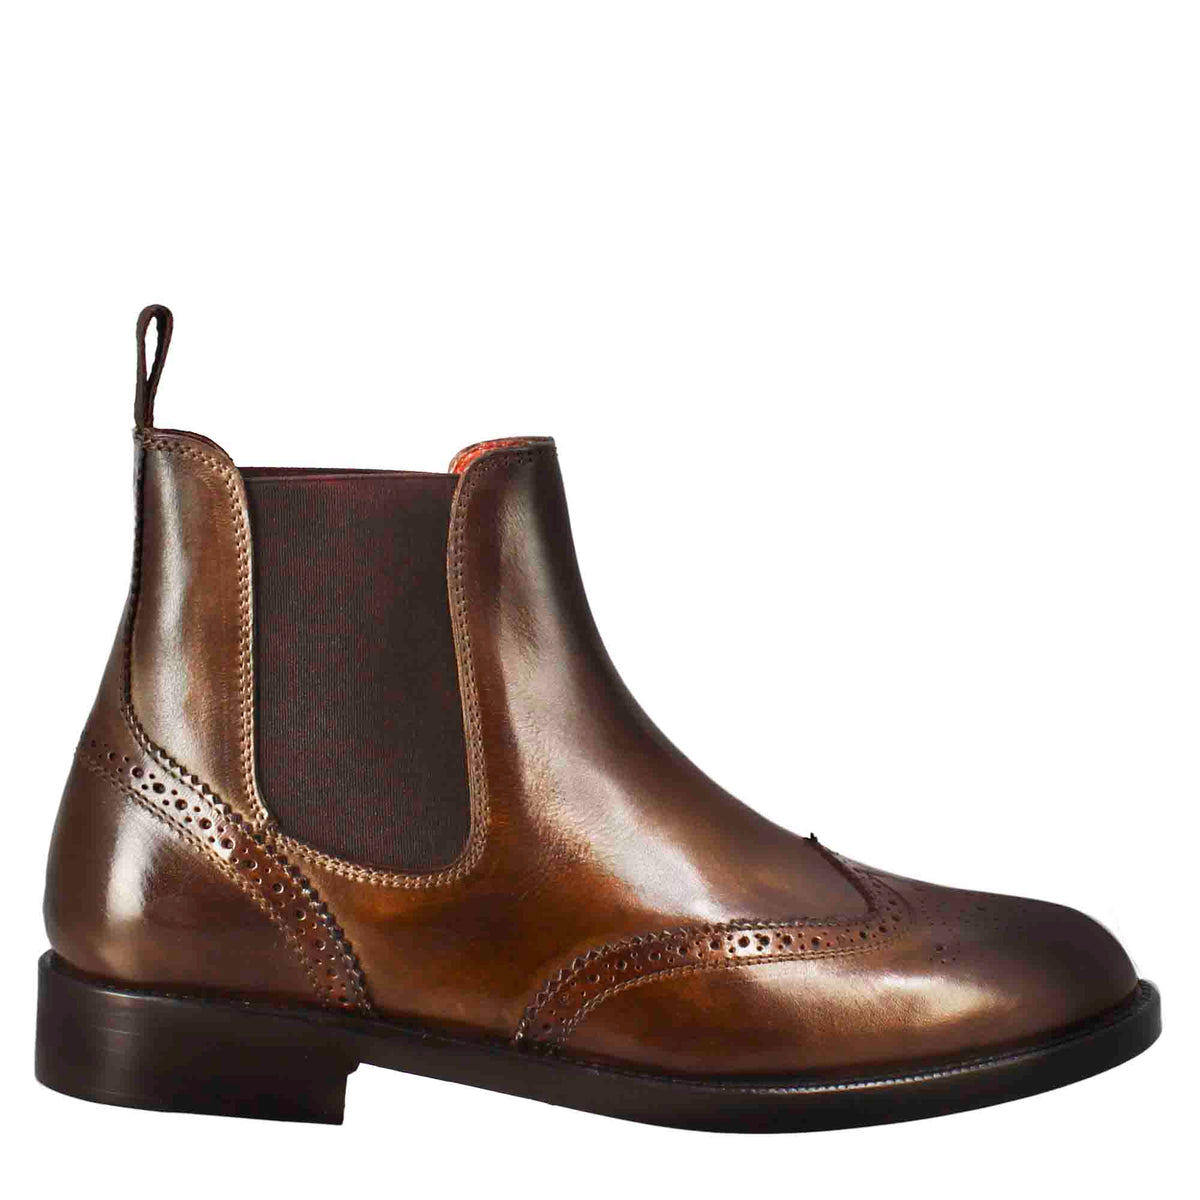 Women's Chelsea boot with brogue details in dark brown leather